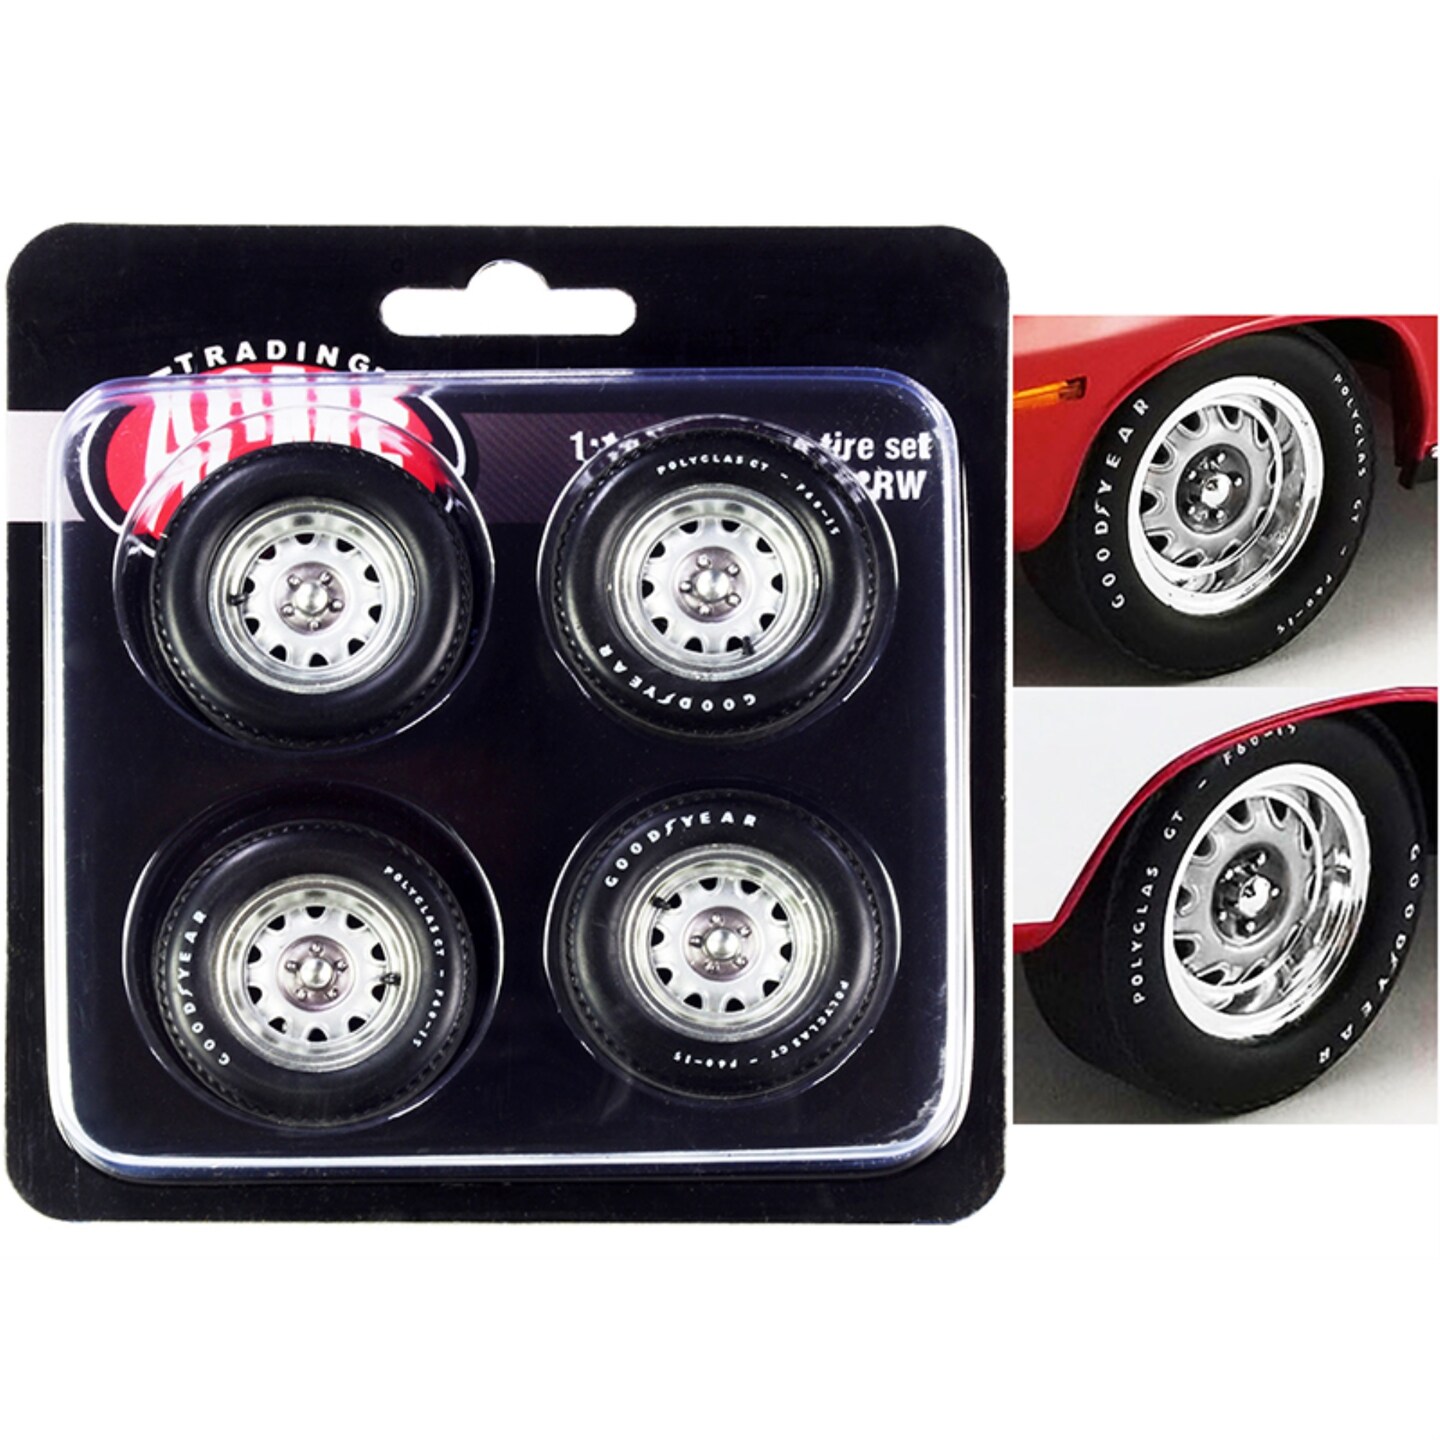 Mopar Rally Wheel and Tire Set of 4 pieces 1/18 by ACME